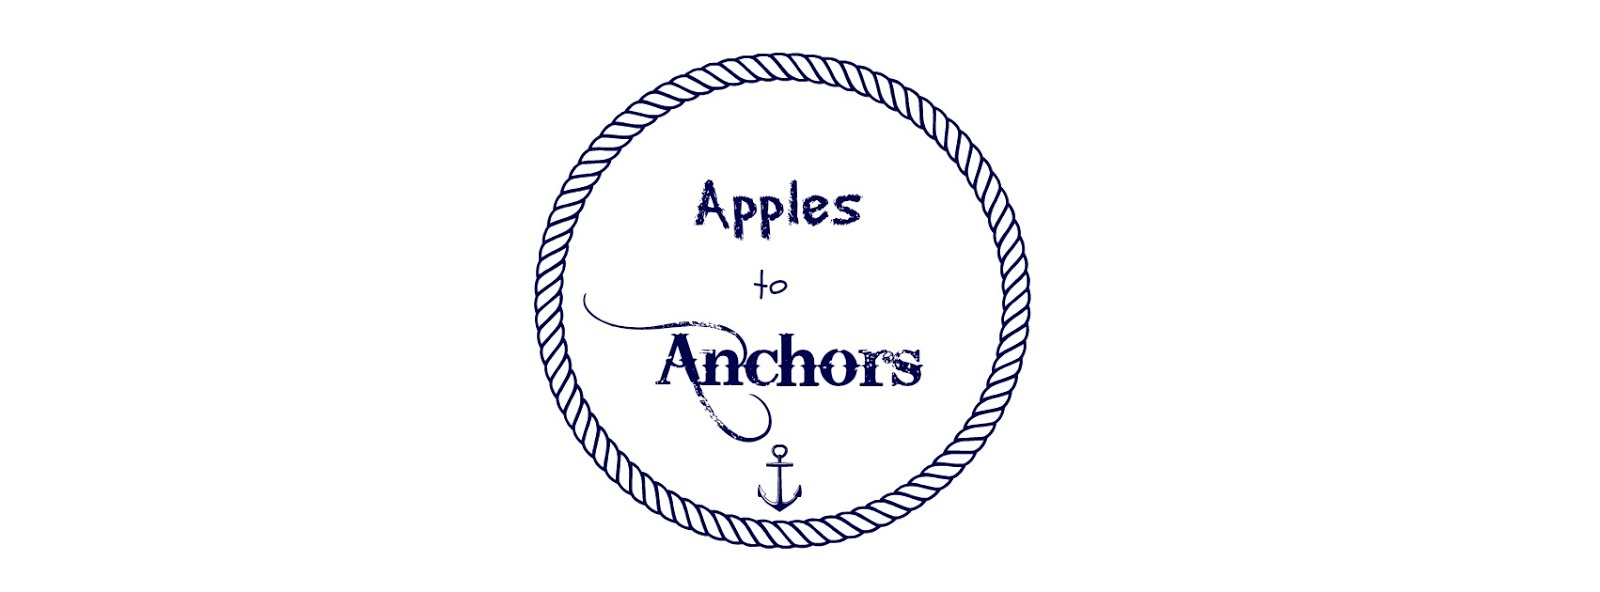 Apples to Anchors